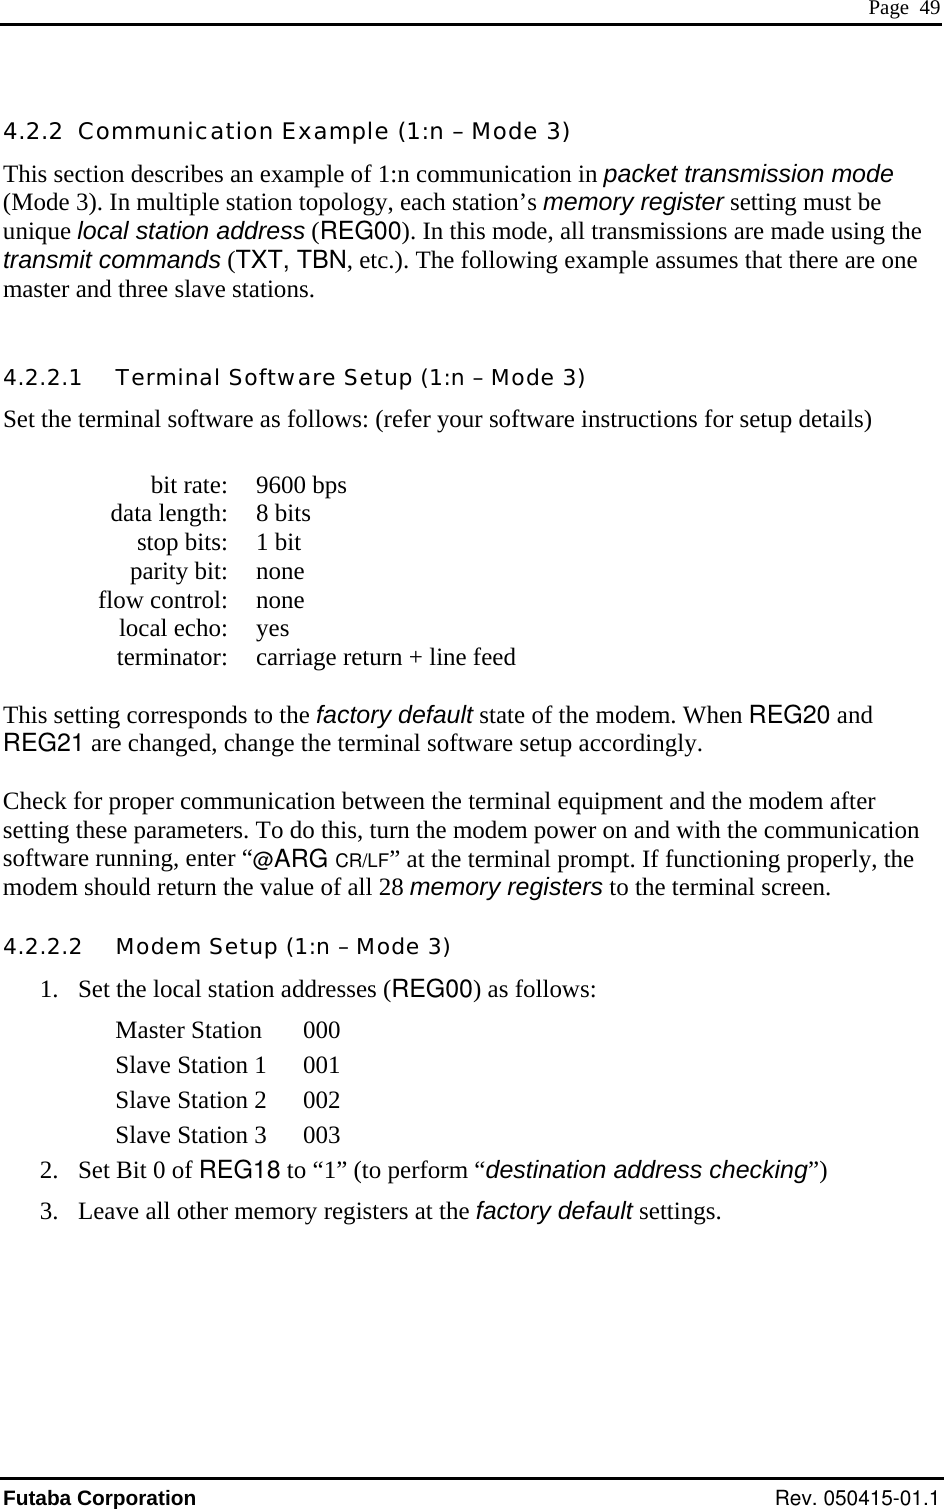  Page  49 4.2.2  Communication Example (1:n – Mode 3) This section describes an example of 1:n communication in packet transmission mode (Mode 3). In multiple station topology, each station’s memory register setting must be unique local station address (REG00). In this mode, all transmissions are made using the transmit commands (TXT, TBN, etc.). The following example assumes that there are one master and three slave stations.  4.2.2.1   Terminal Software Setup (1:n – Mode 3) Set the terminal software as follows: (refer your software instructions for setup details)    bit rate:  9600 bps   data length:  8 bits   stop bits:  1 bit  parity bit: none  flow control: none  local echo: yes   terminator:  carriage return + line feed  This setting corresponds to the factory default state of the modem. When REG20 and REG21 are changed, change the terminal software setup accordingly.  Check for proper communication between the terminal equipment and the modem after setting these parameters. To do this, turn the modem power on and with the communication software running, enter “@ARG CR/LF” at the terminal prompt. If functioning properly, the modem should return the value of all 28 memory registers to the terminal screen. 4.2.2.2   Modem Setup (1:n – Mode 3) 1.  Set the local station addresses (REG00) as follows: Master Station  000 Slave Station 1  001 Slave Station 2  002 Slave Station 3  003 2.  Set Bit 0 of REG18 to “1” (to perform “destination address checking”) 3.  Leave all other memory registers at the factory default settings. Futaba Corporation Rev. 050415-01.1 